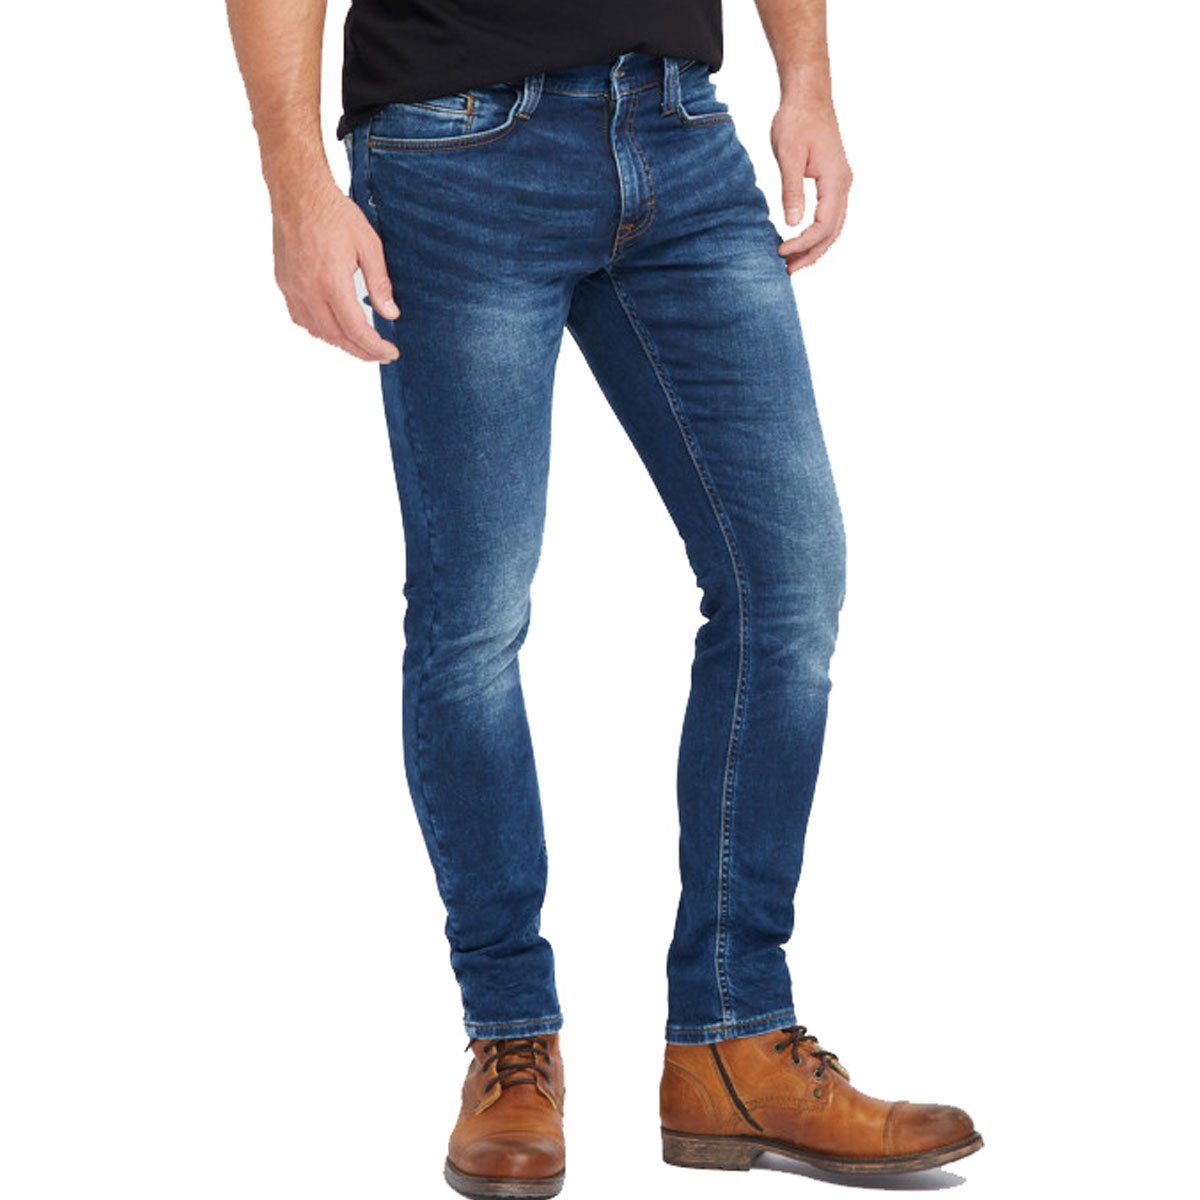 Mustang Faded Blue Premium Denim Pant : Buy Online At Best Prices In ...